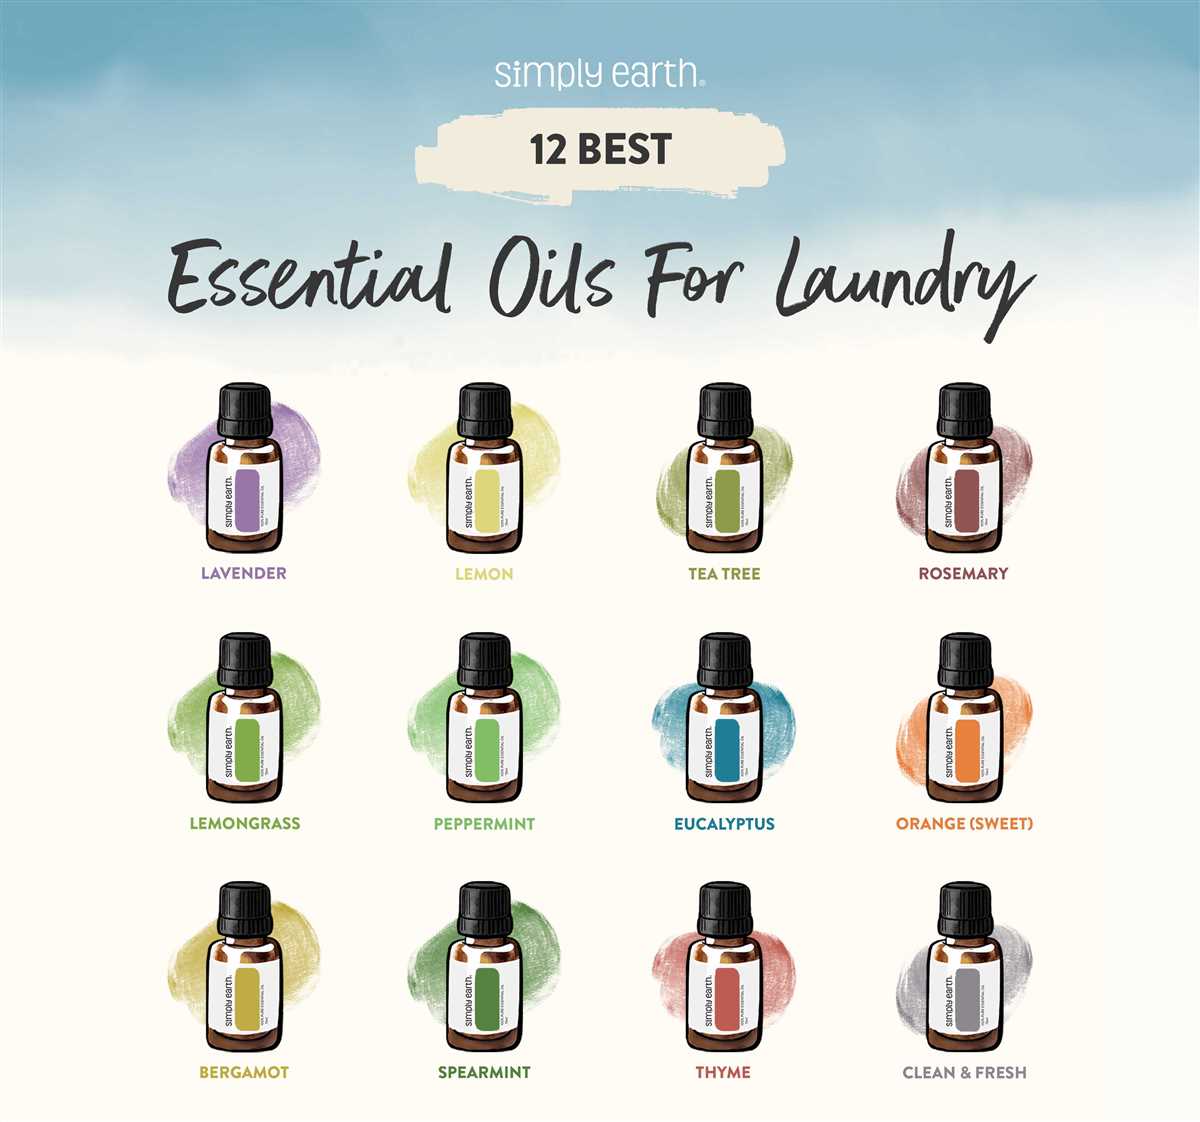 Discover the Benefits of Using Essential Oils in Your Laundry Routine